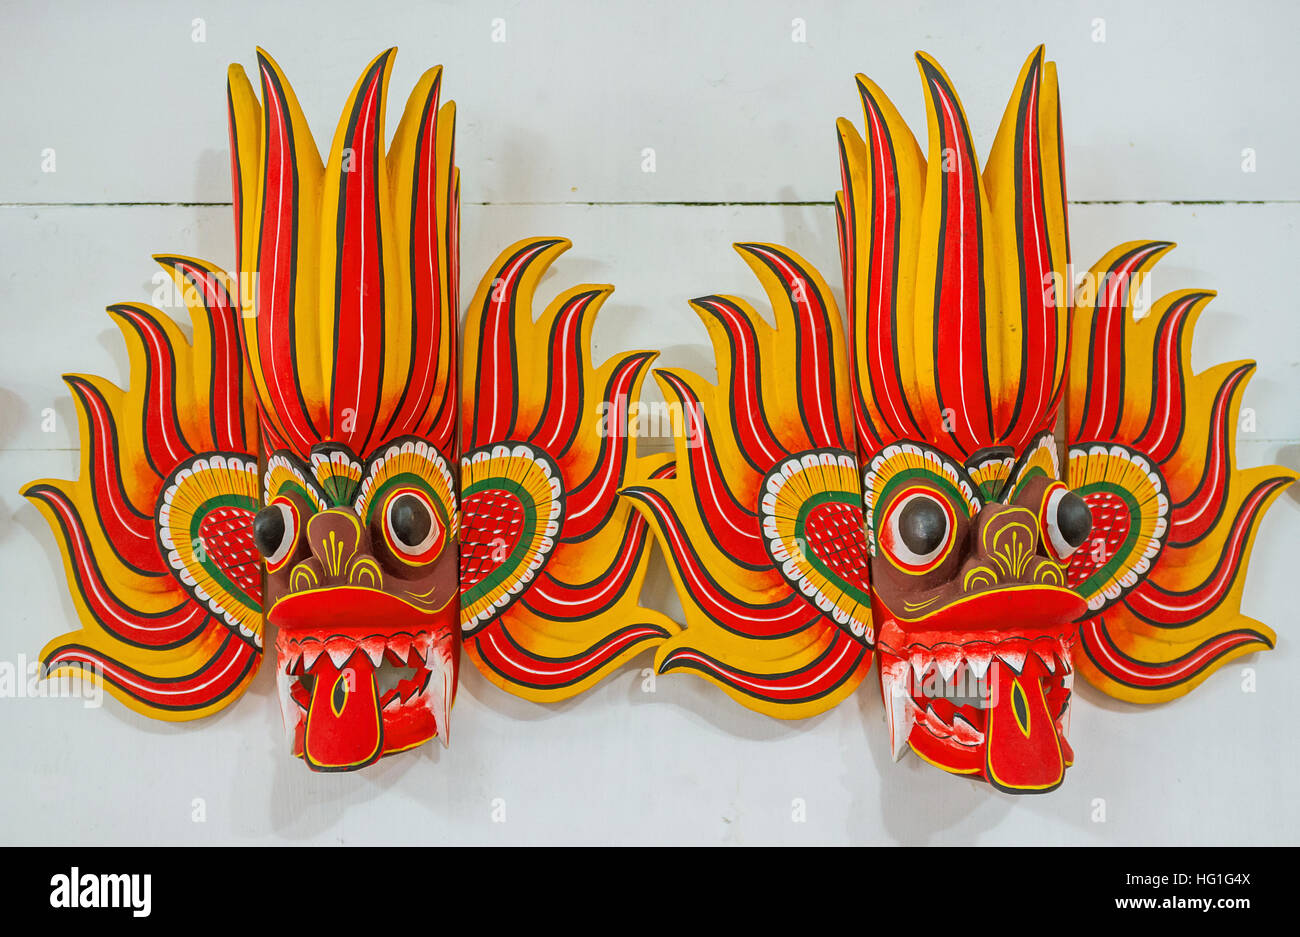 The Ginidella Raksha masks are used by Fire dancers to ward off evil, they decorated in bright red and yellow colors Stock Photo